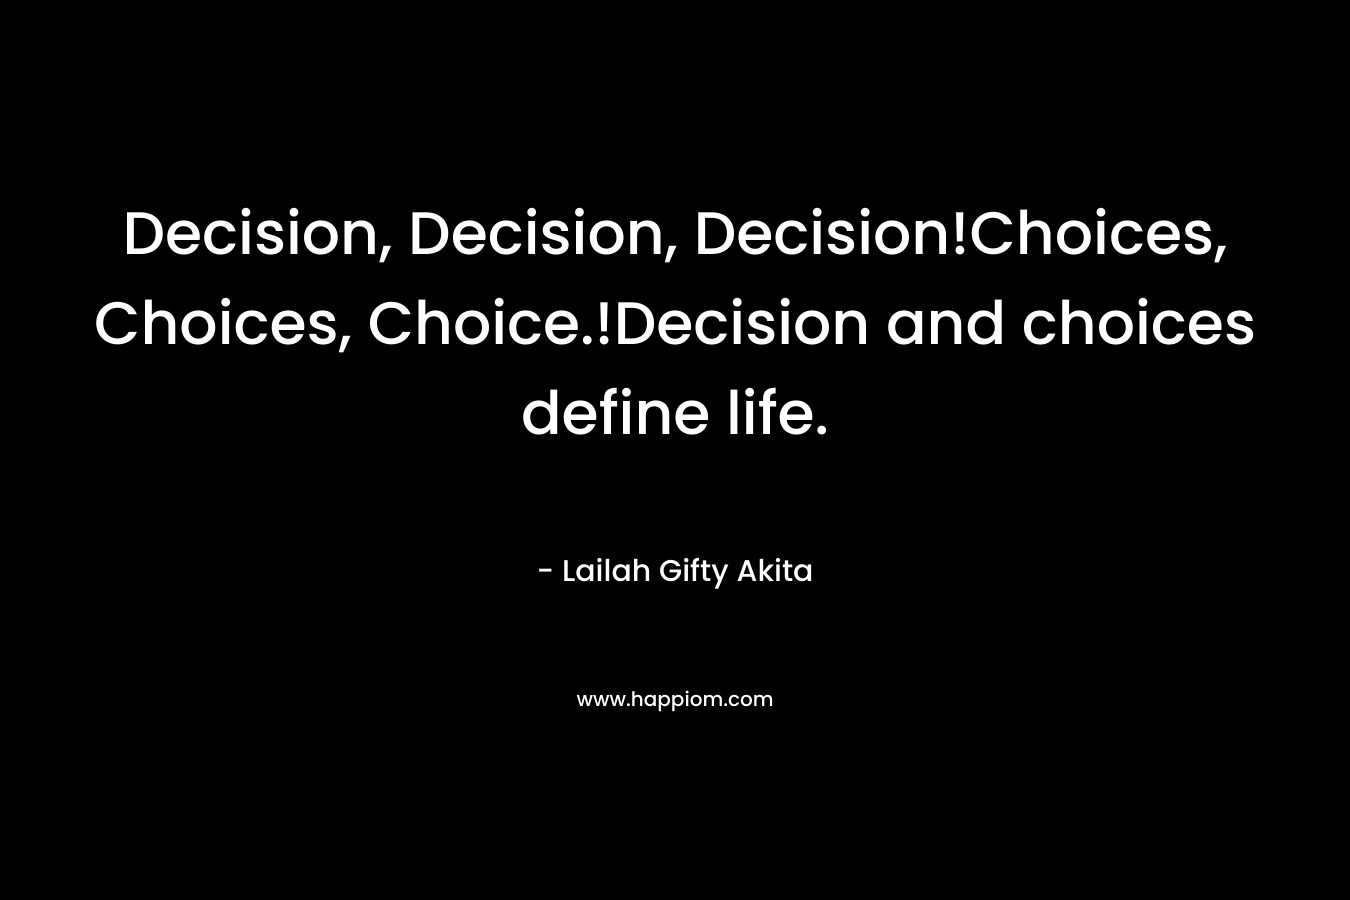 Decision, Decision, Decision!Choices, Choices, Choice.!Decision and choices define life.